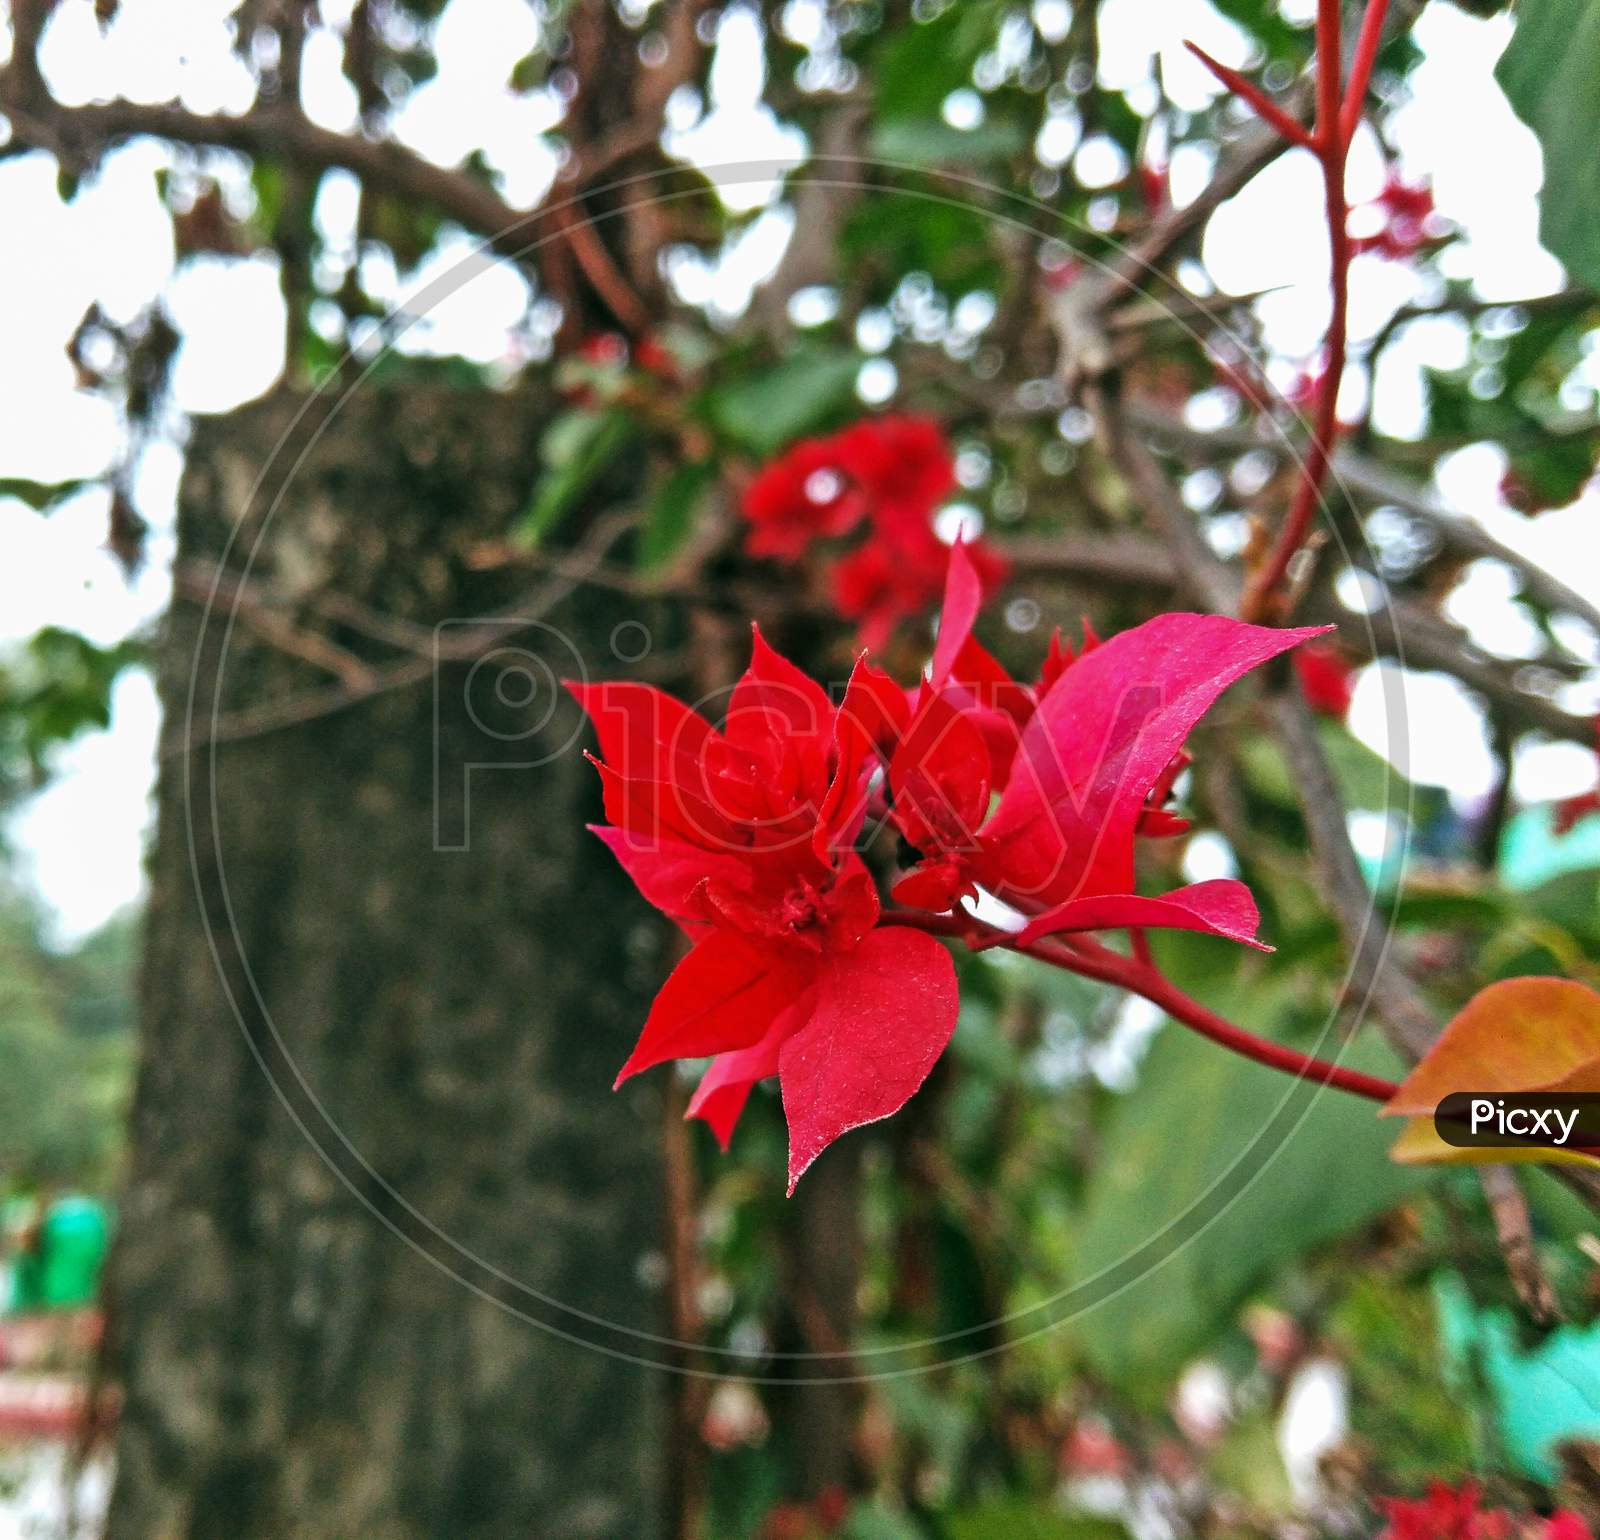 Bougainvillea Chitra Red Flower At Home With Background View